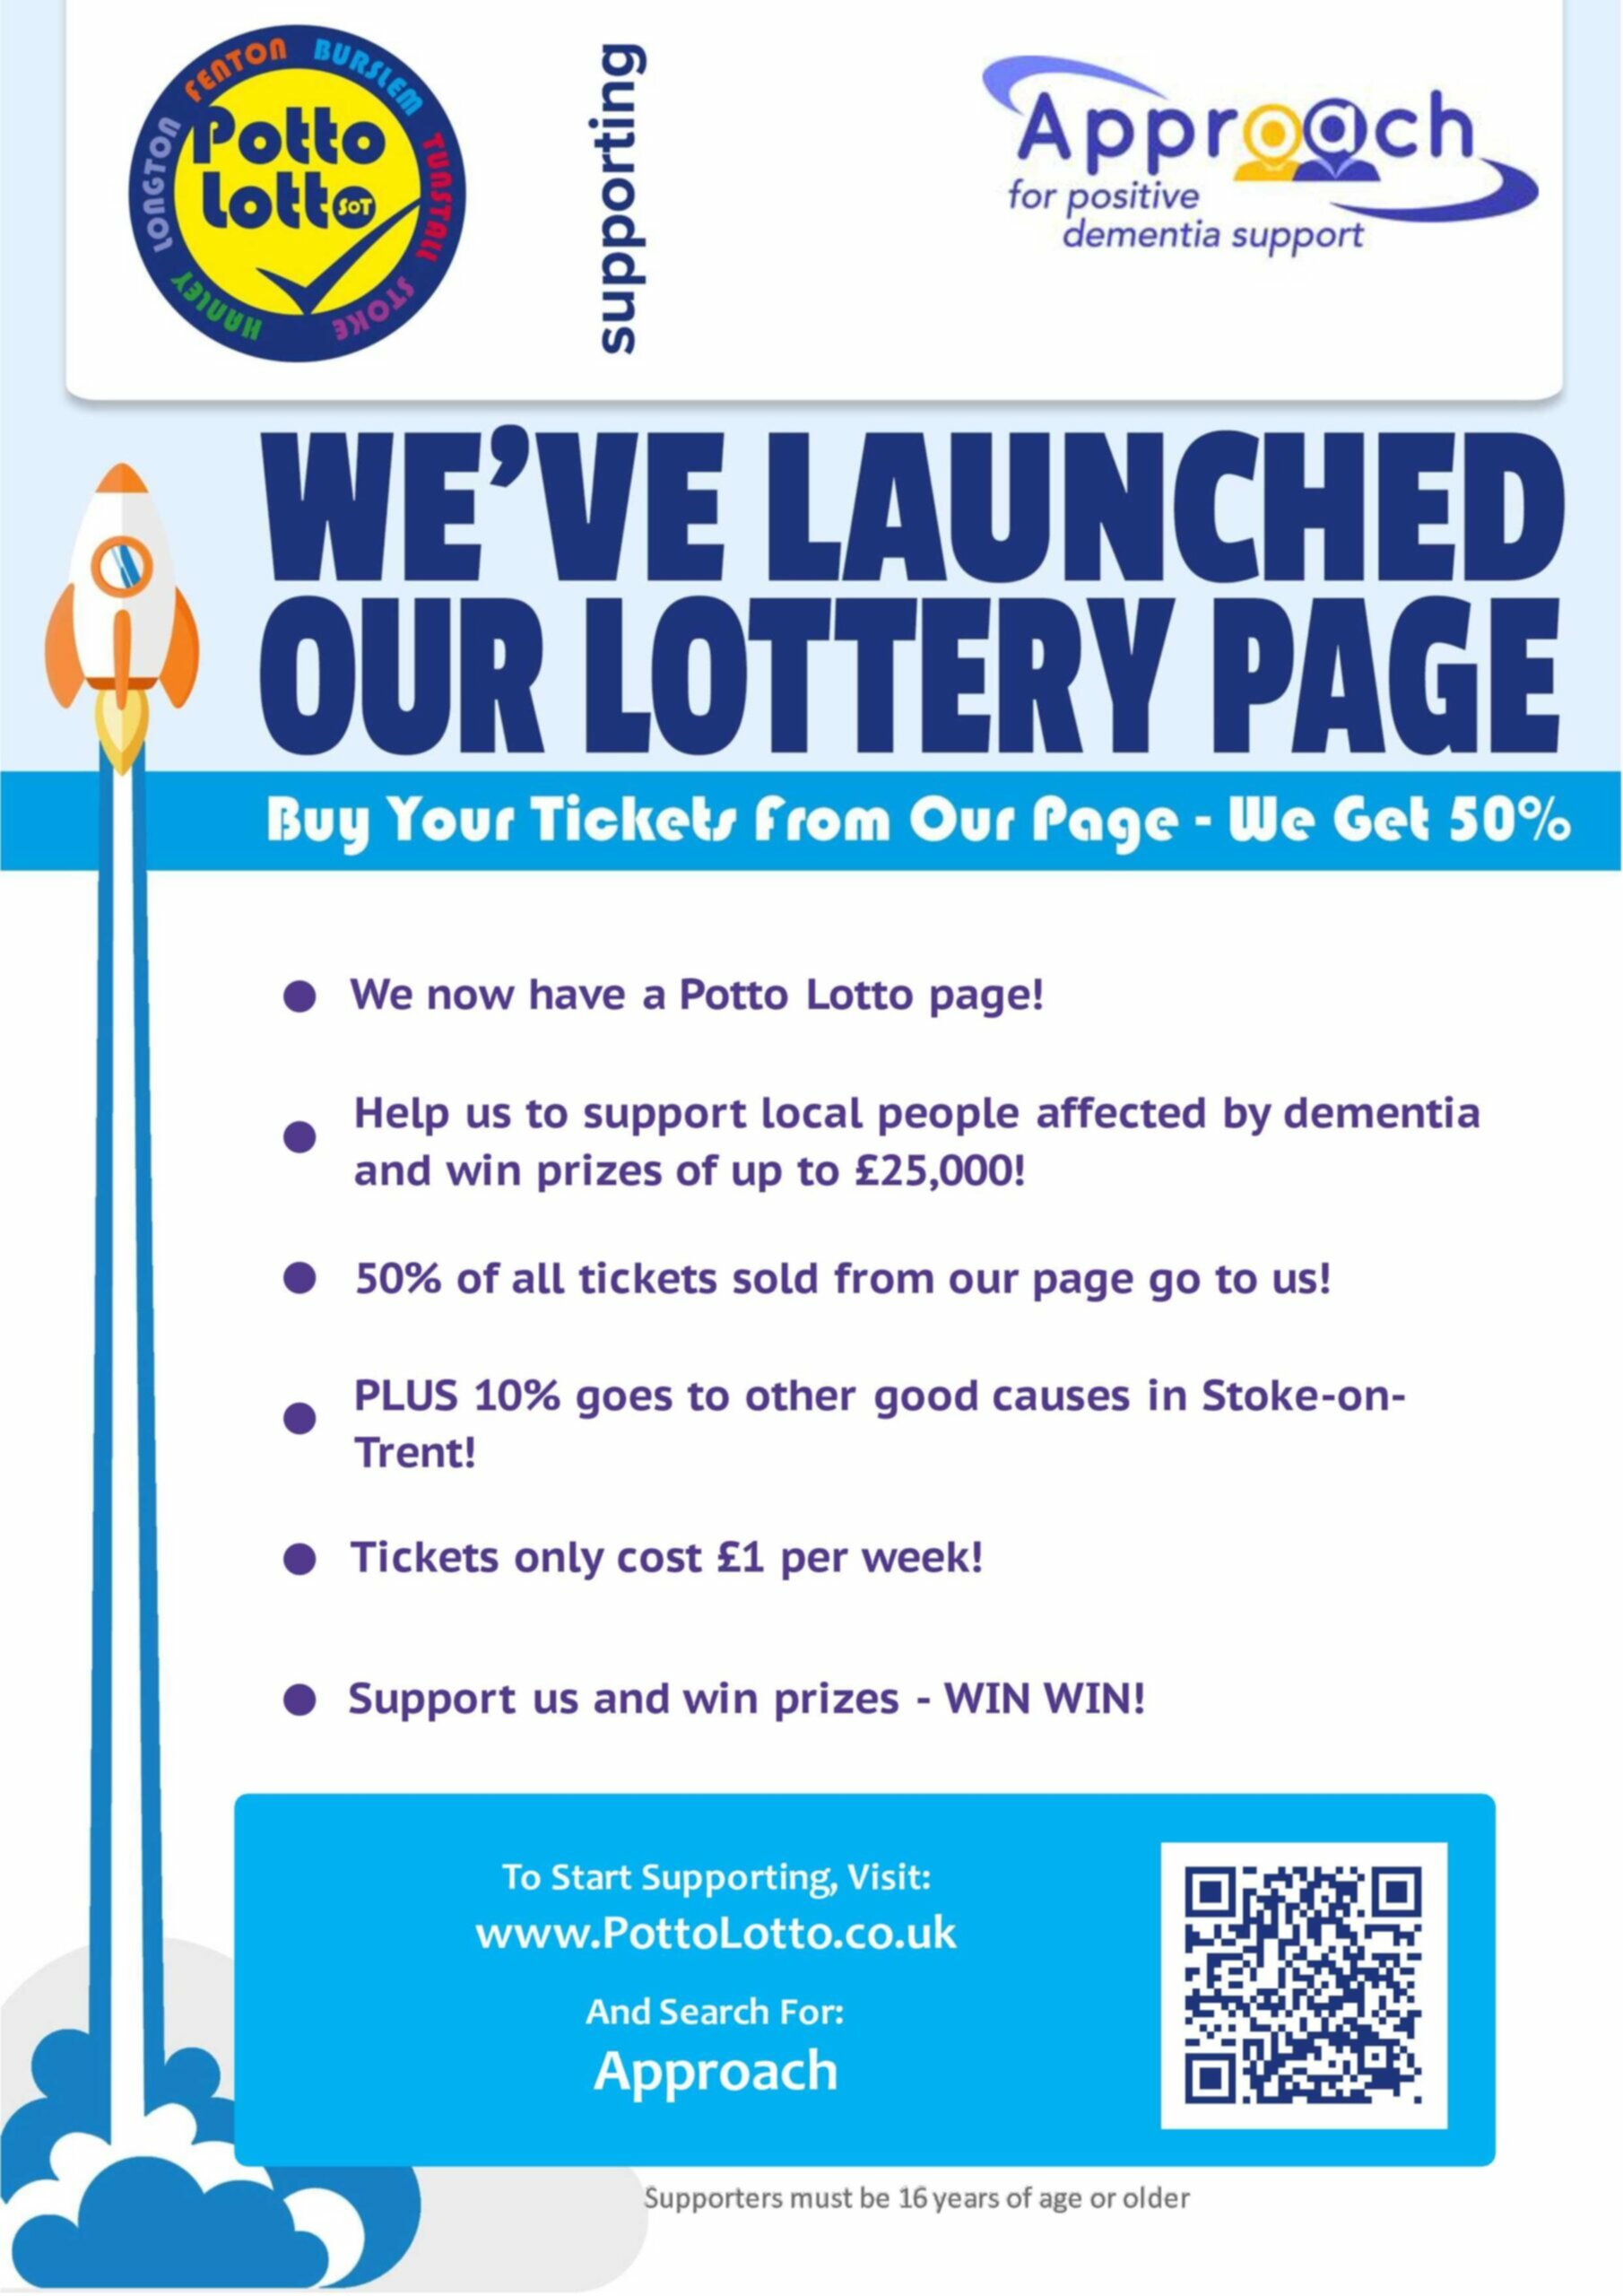 Approach Joins Potto Lotto